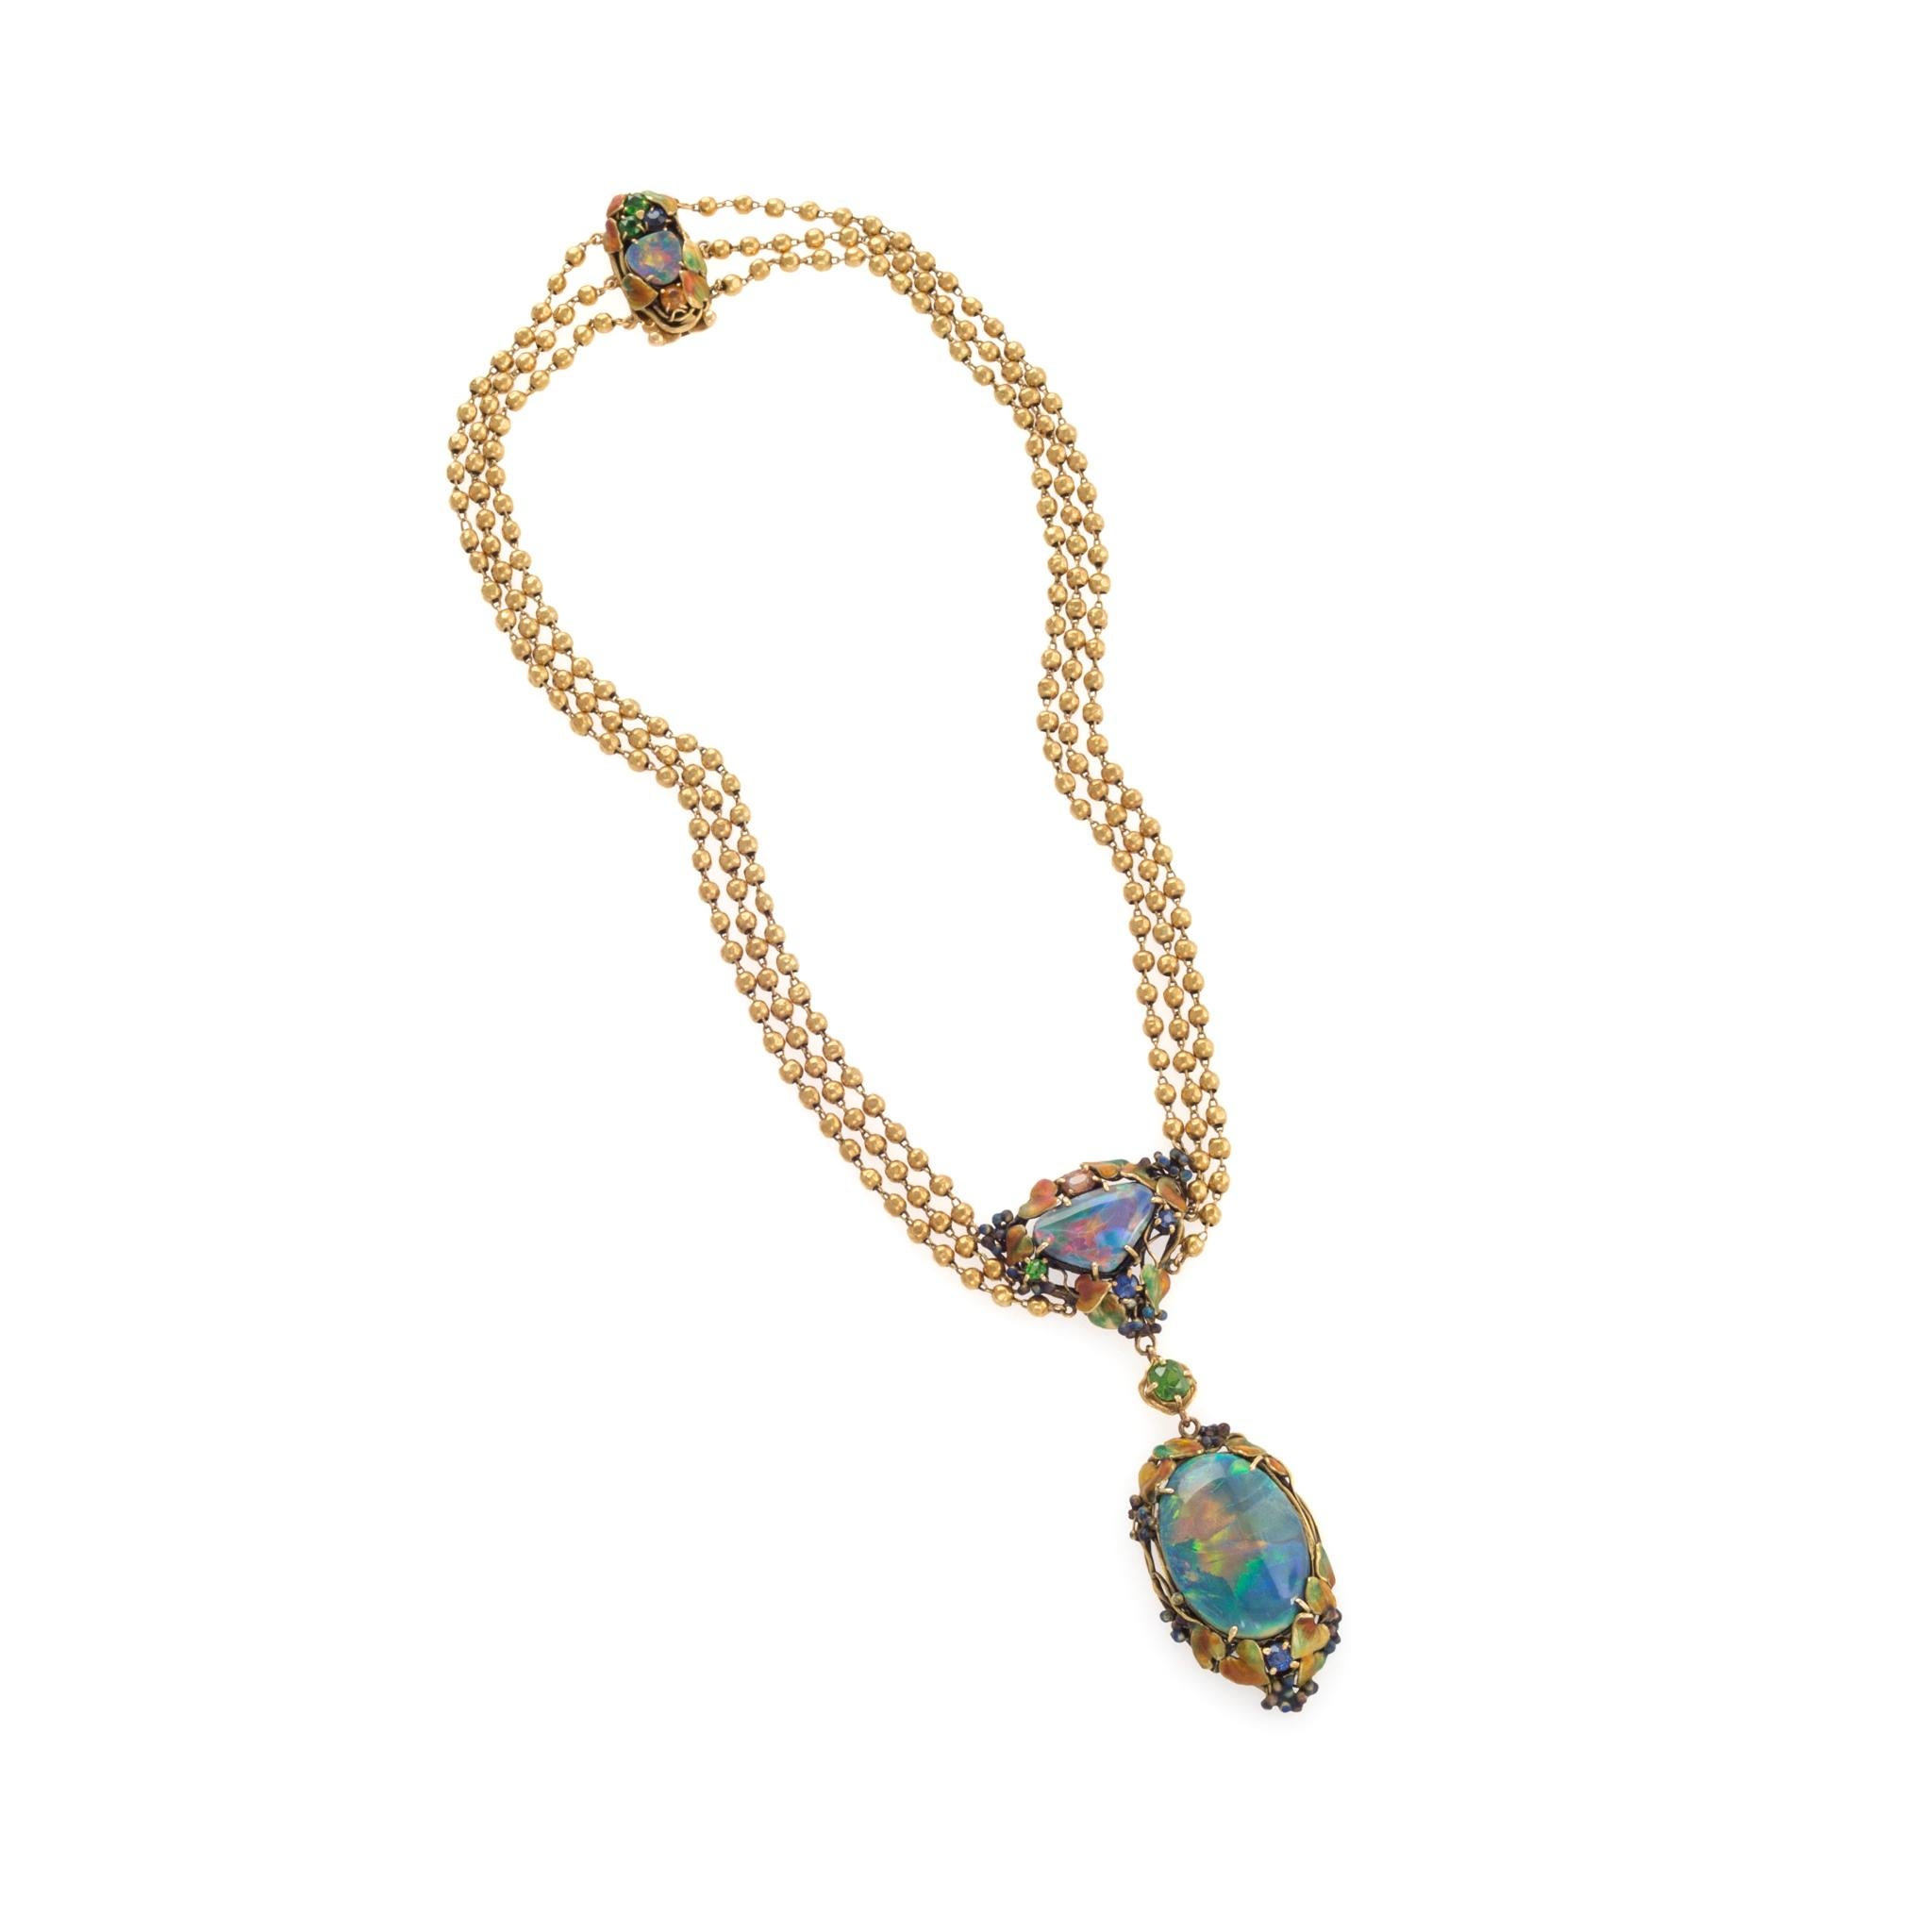 Louis Comfort Tiffany played with the unusual light and color effects of black opals, green garnets, and sapphires to create an impressionistic artwork in this visually intriguing Tiffany & Co. necklace and bracelet set. The opals, with their